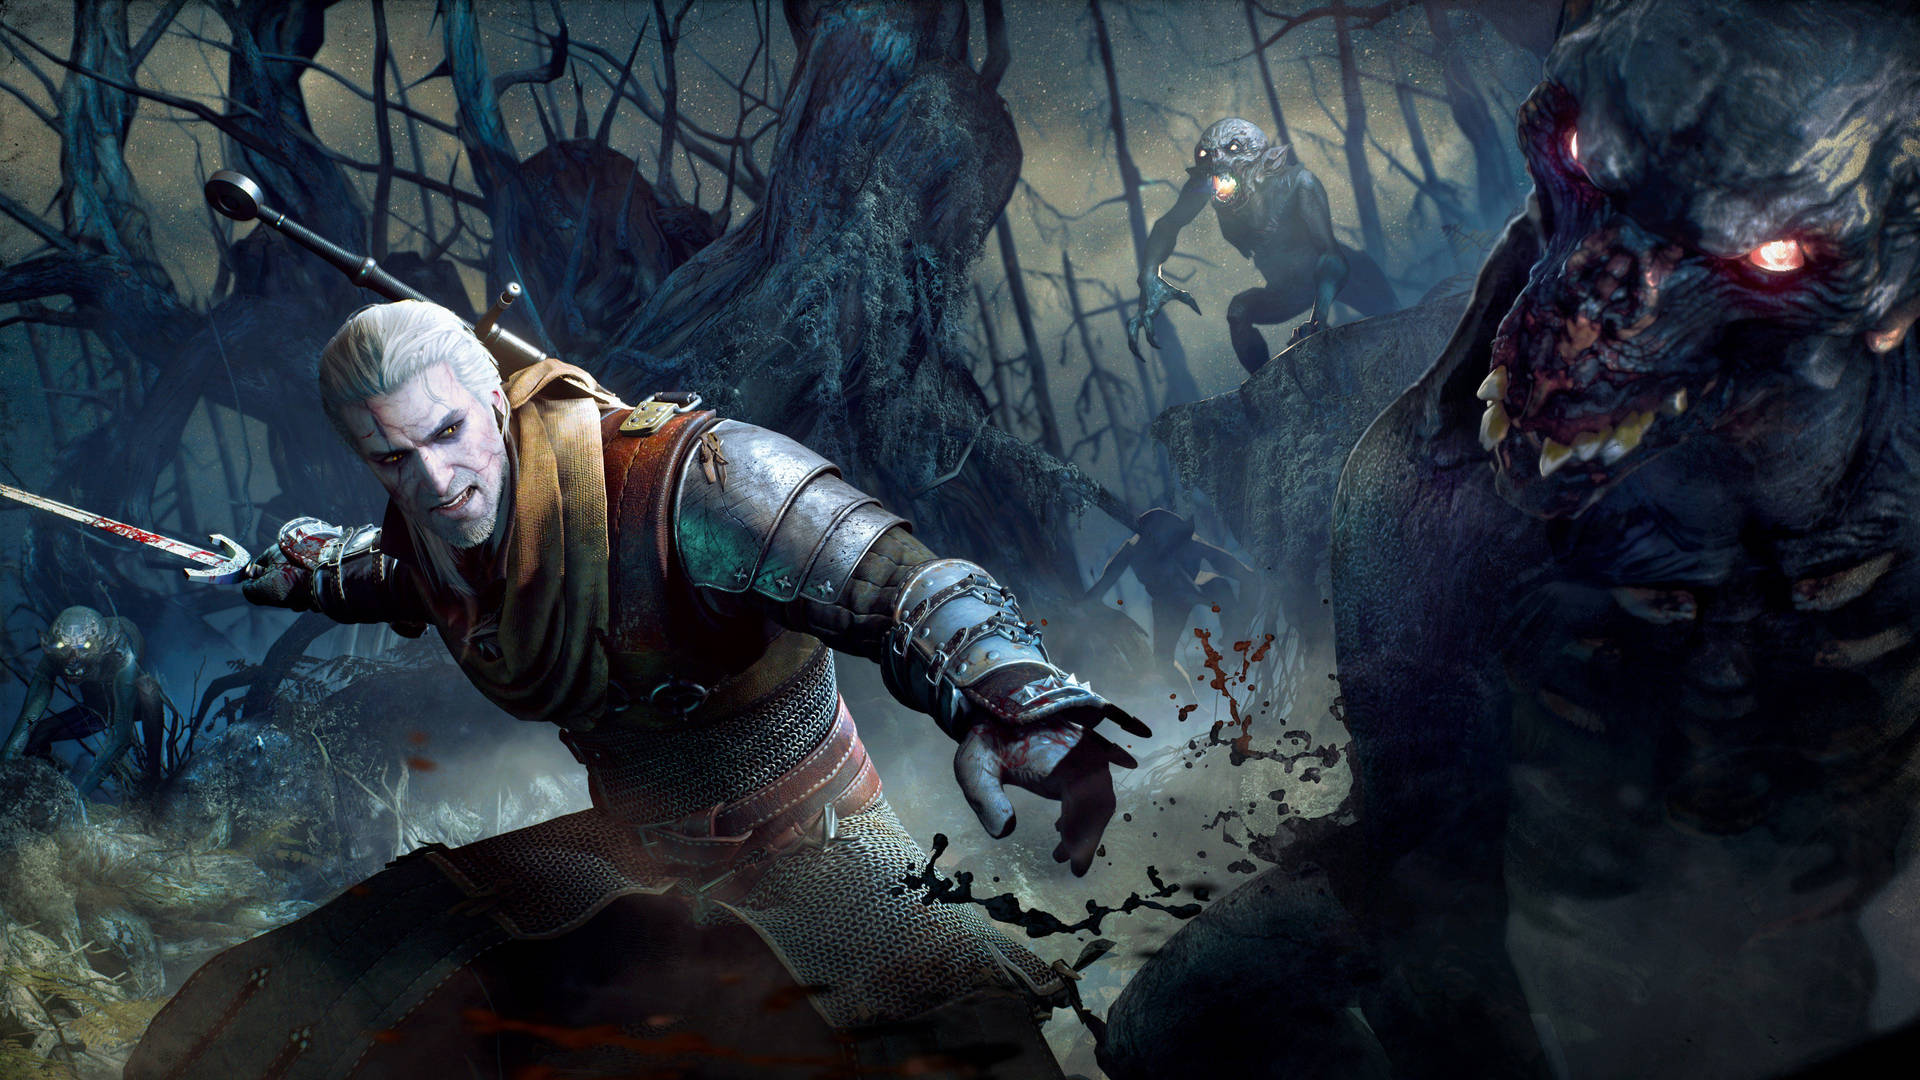 Geralt of Rivia fights demons in the forest. Wallpaper